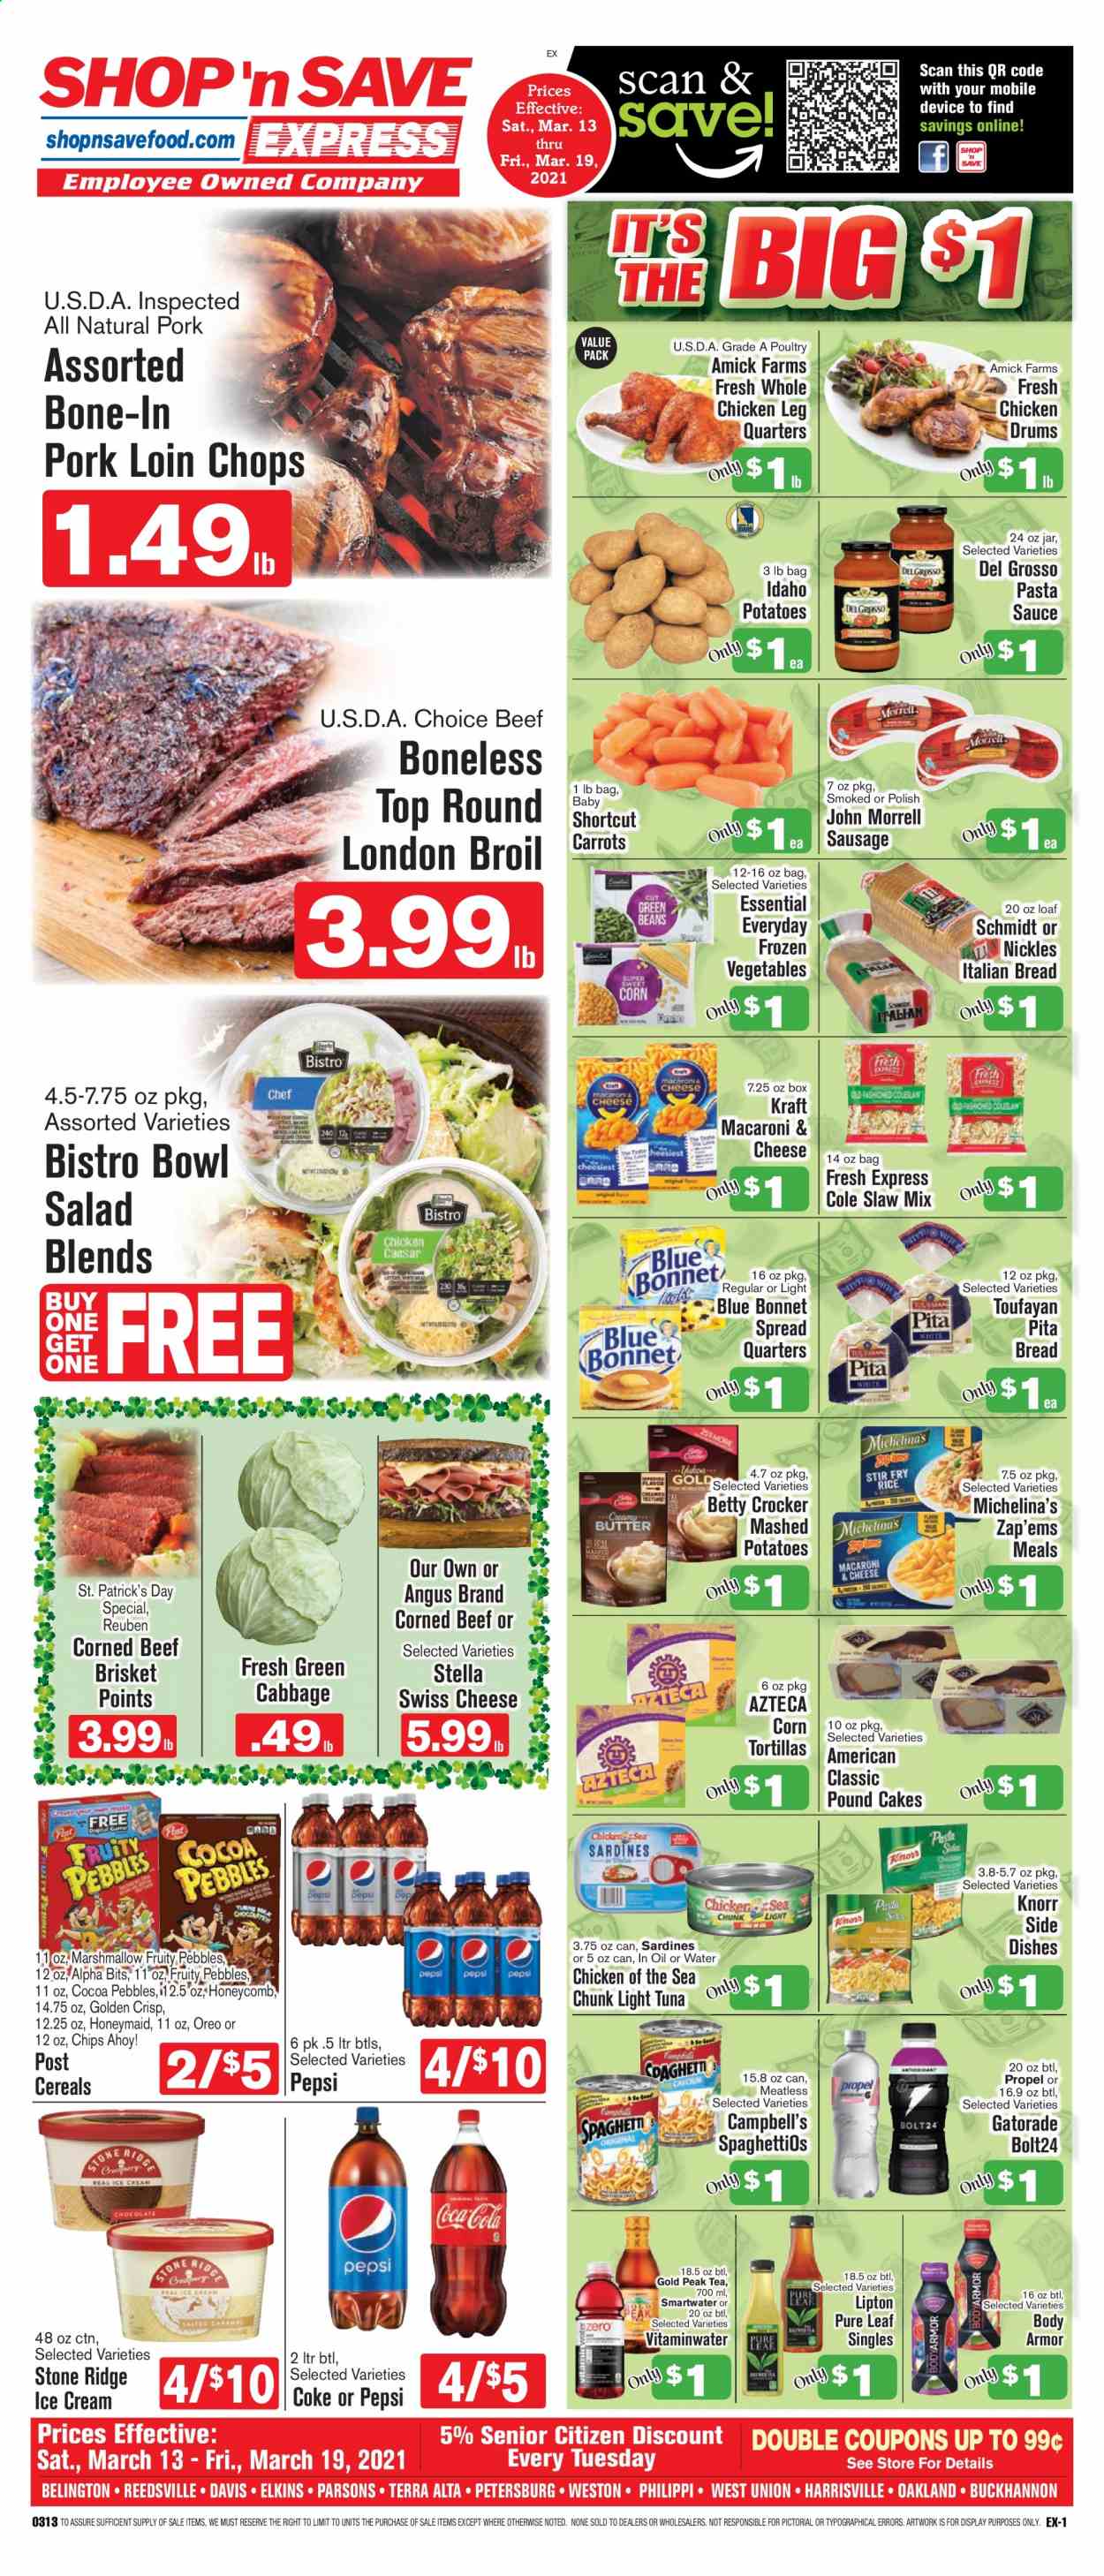 thumbnail - Shop ‘n Save Express Flyer - 03/13/2021 - 03/19/2021 - Sales products - bread, tortillas, pita, cake, whole chicken, beef meat, corned beef, beef brisket, pork loin, pork meat, sardines, tuna, Campbell's, macaroni & cheese, mashed potatoes, Knorr, salad, sauce, Kraft®, sausage, swiss cheese, Oreo, ice cream, carrots, corn, frozen vegetables, marshmallows, Chips Ahoy!, cocoa, light tuna, Chicken of the Sea, cereals, Fruity Pebbles, pasta sauce, Coca-Cola, Pepsi, Lipton, Gold Peak Tea, Gatorade, tea, Pure Leaf. Page 1.